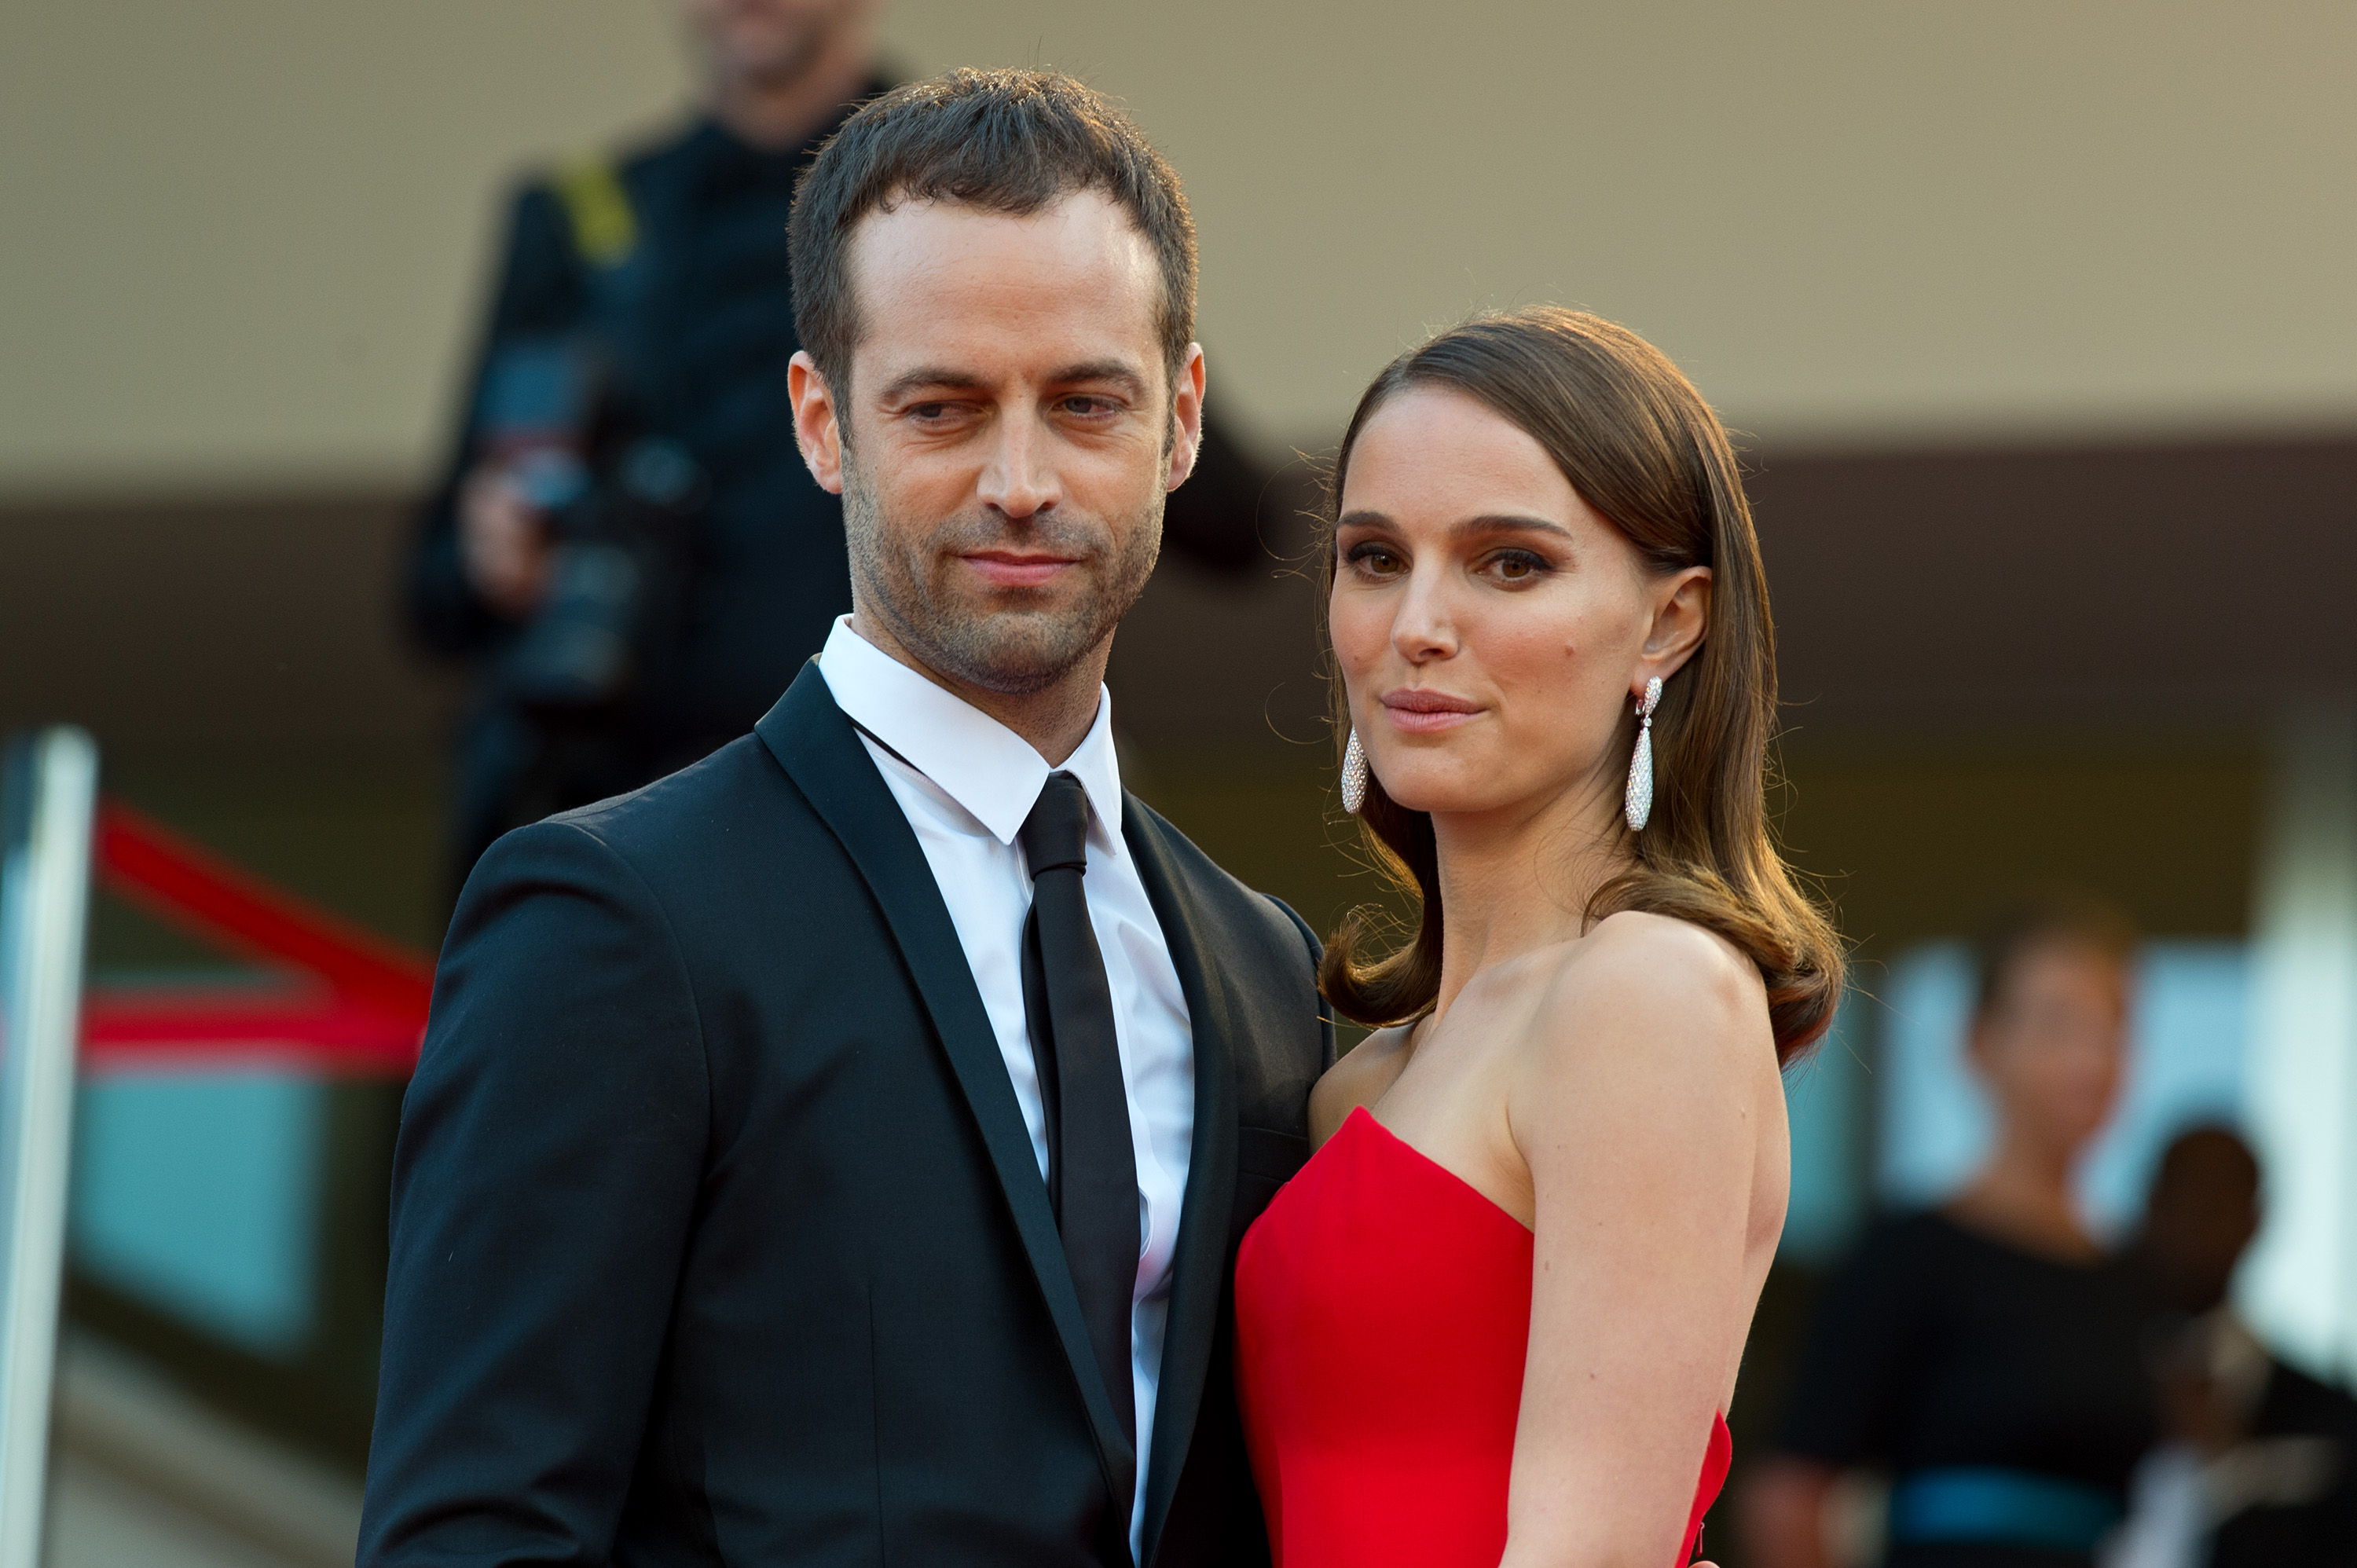 Benjamin Millepied and Natalie Portman on May 13, 2015 in Cannes, France | Source: Getty Images